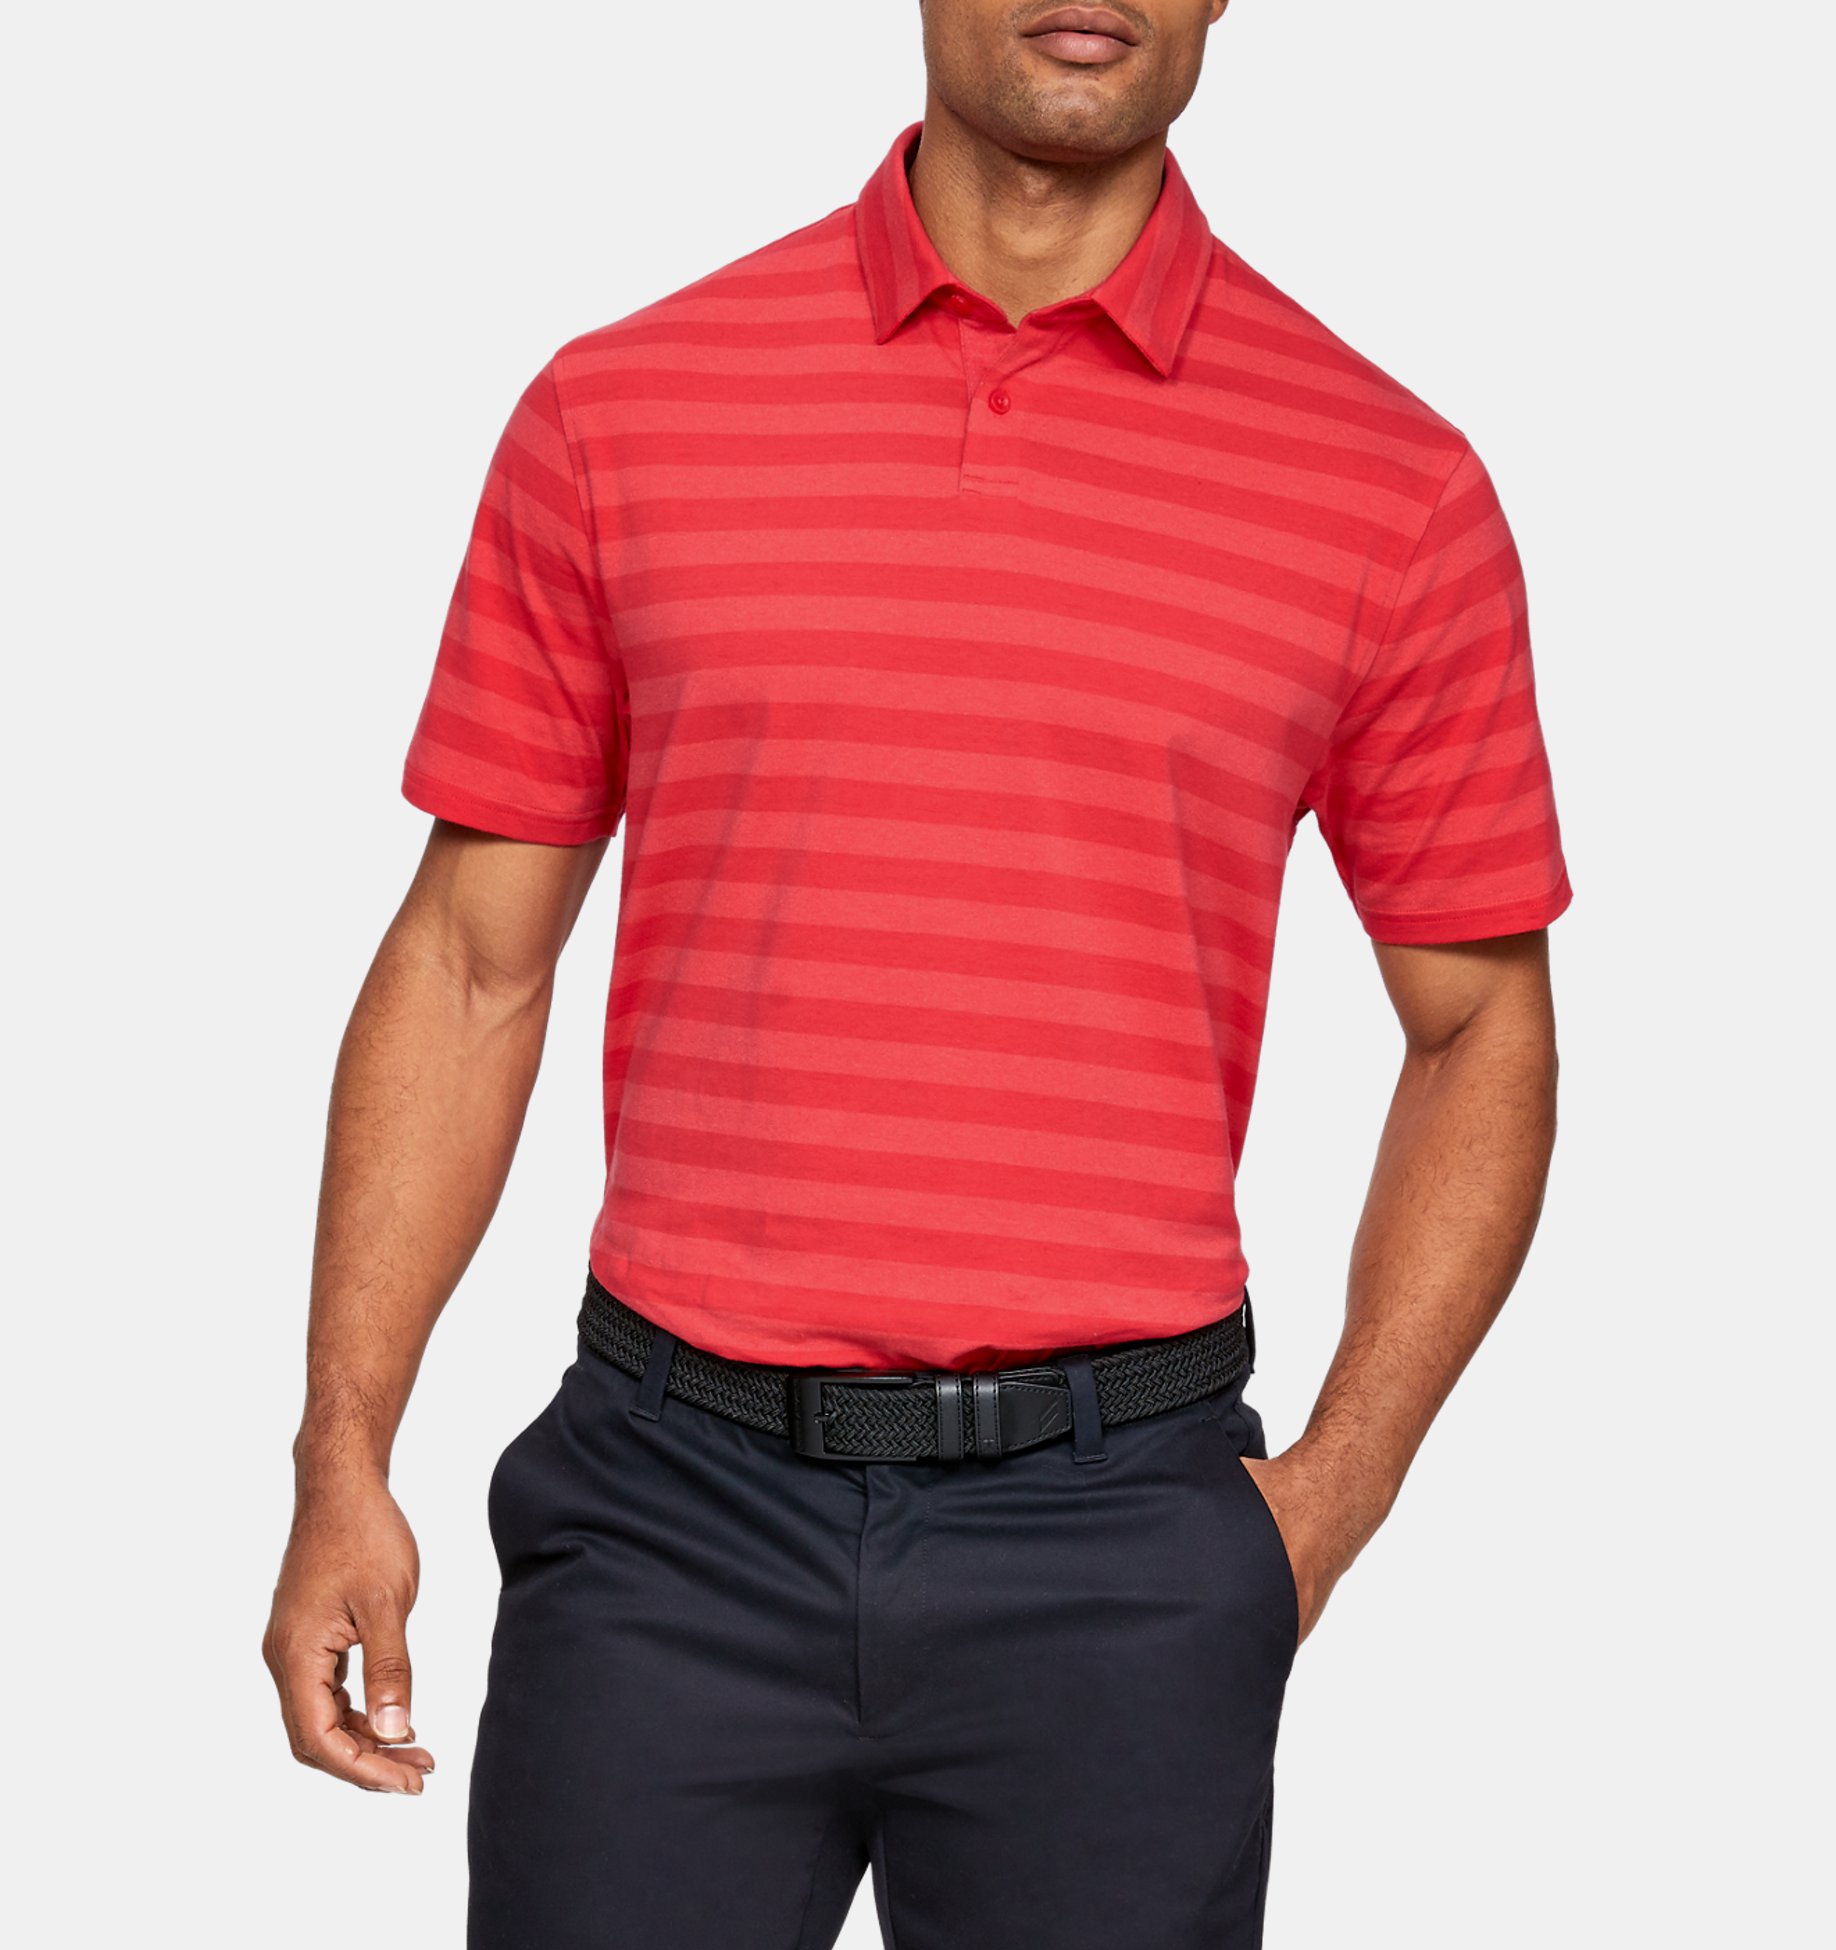 NCAA Adult-Men Mens Charge Polo 